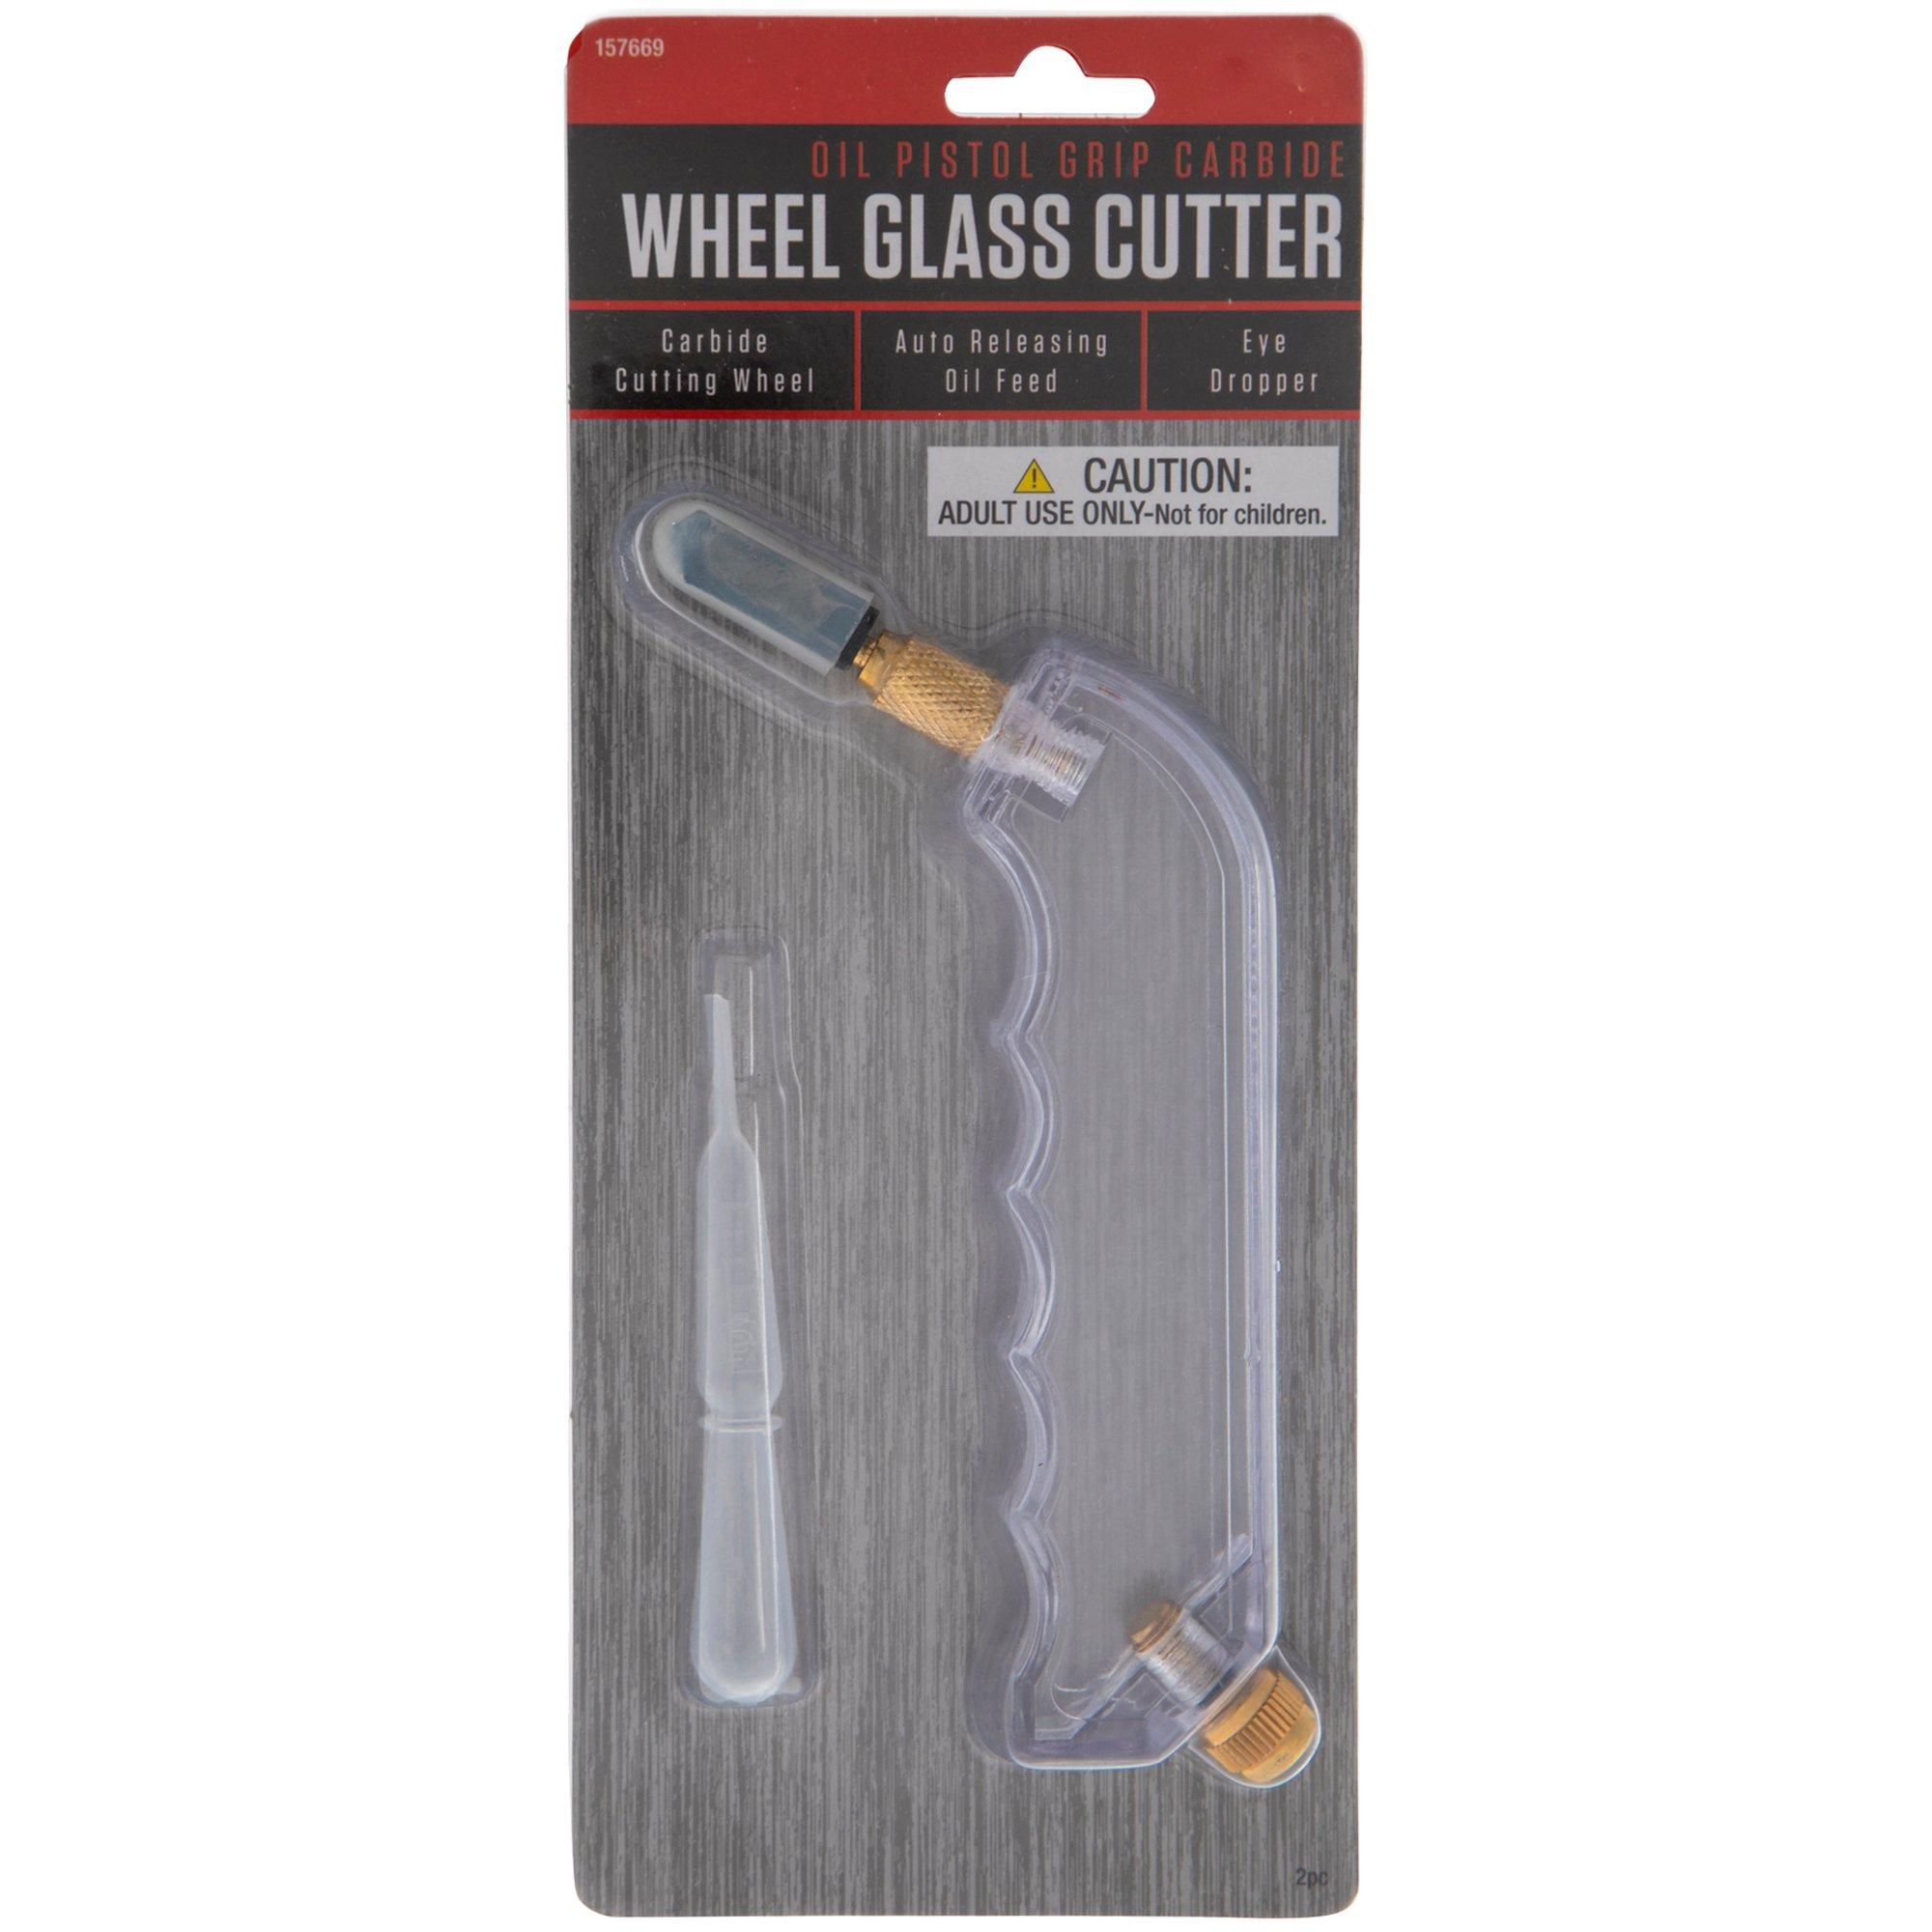 Value Glass Cutter - Pistol Grip Stained Glass Cutter - Clear Oil Fed - for  Stained Glass and Mosaic Art Projects - Starter Tool Kit item